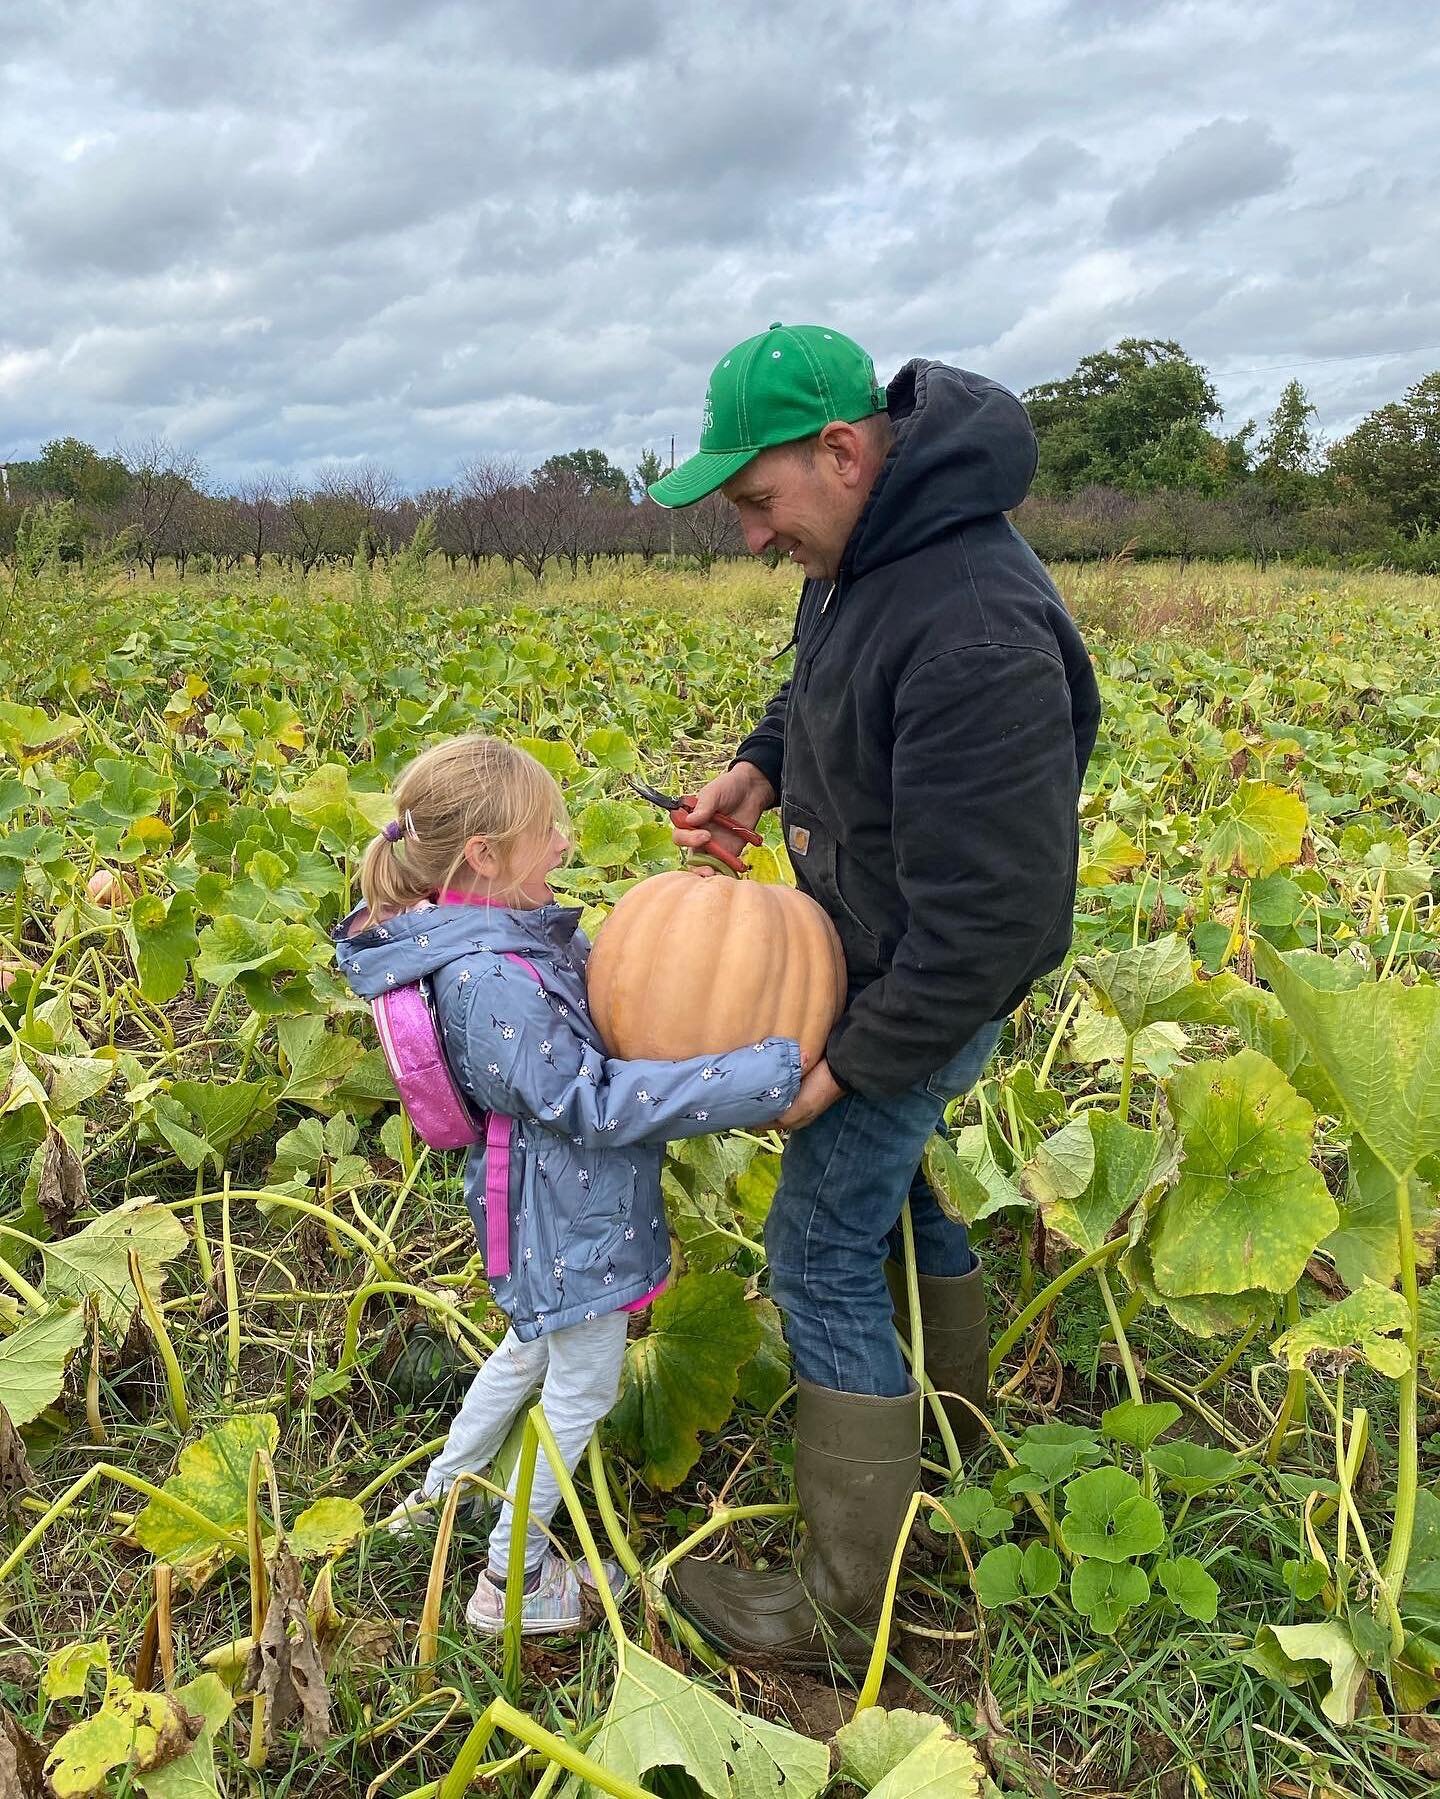 Beautiful Fall evening picking pumpkins and apples with grandkids Ava and Owen❤️